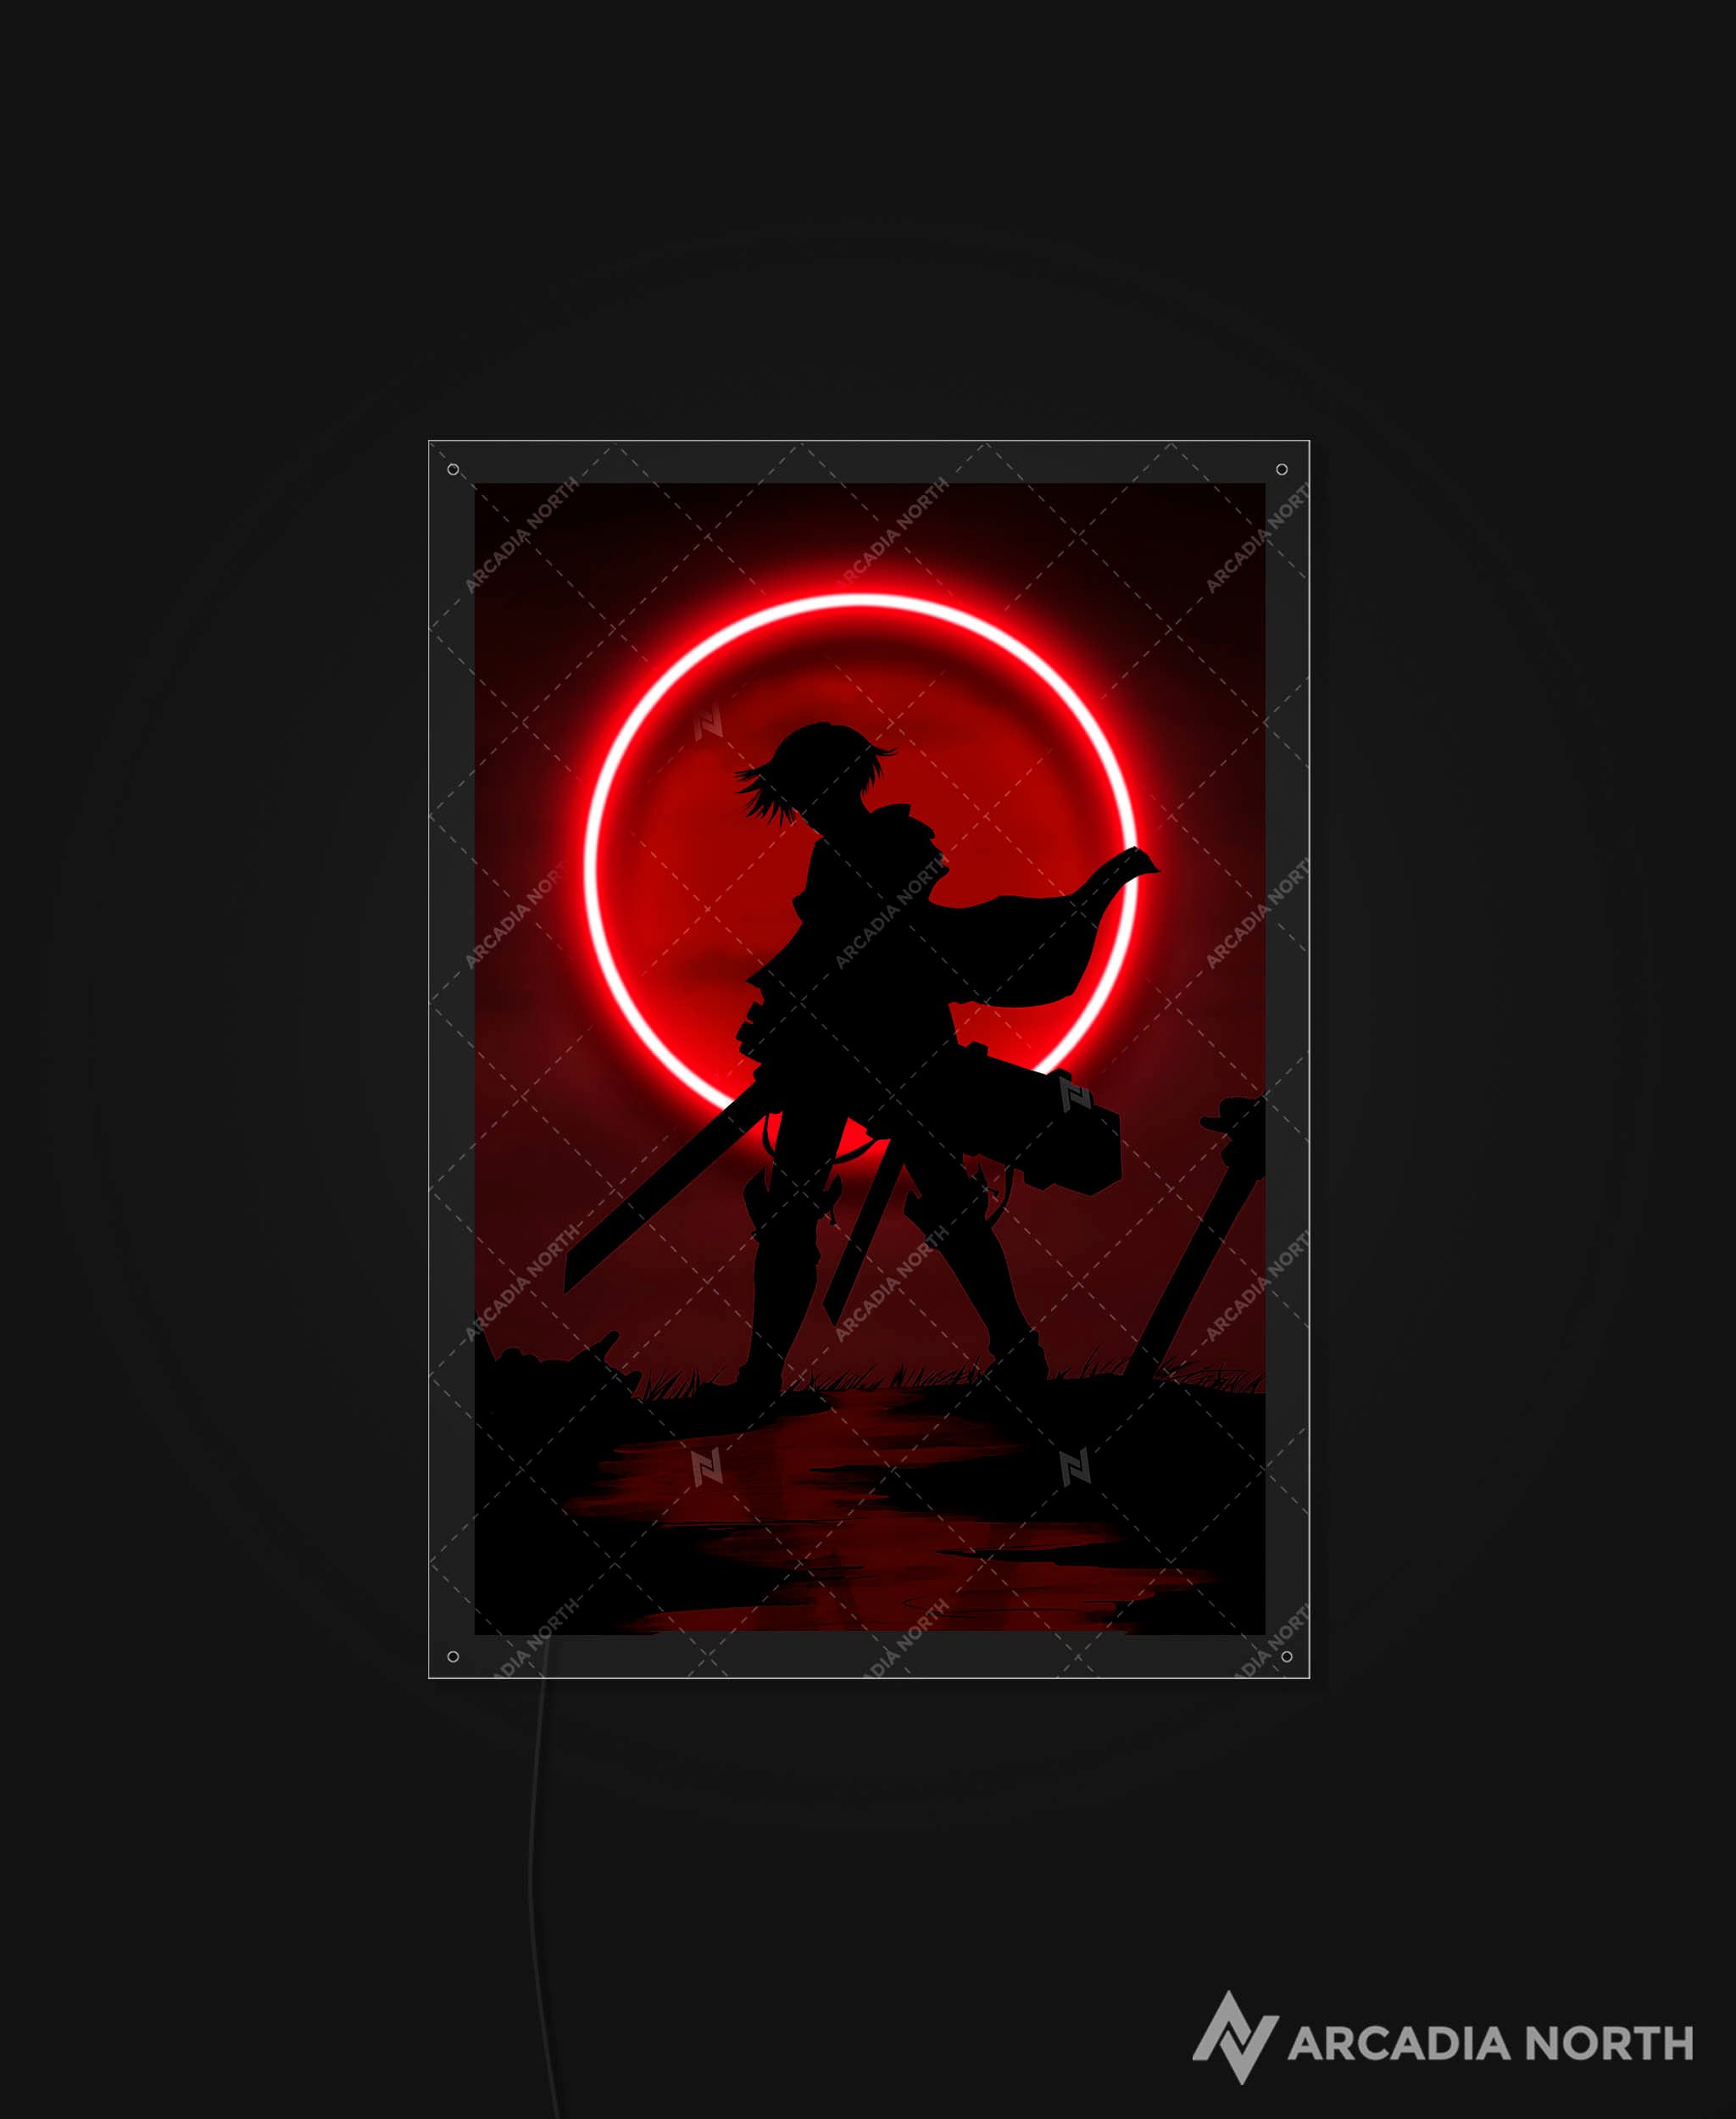 Arcadia North AURALIGHT - an LED Poster featuring the anime Attack on Titan with Levi Ackerman standing in front of a red moon illuminated by glowing neon LED lights. UV-printed on acrylic.